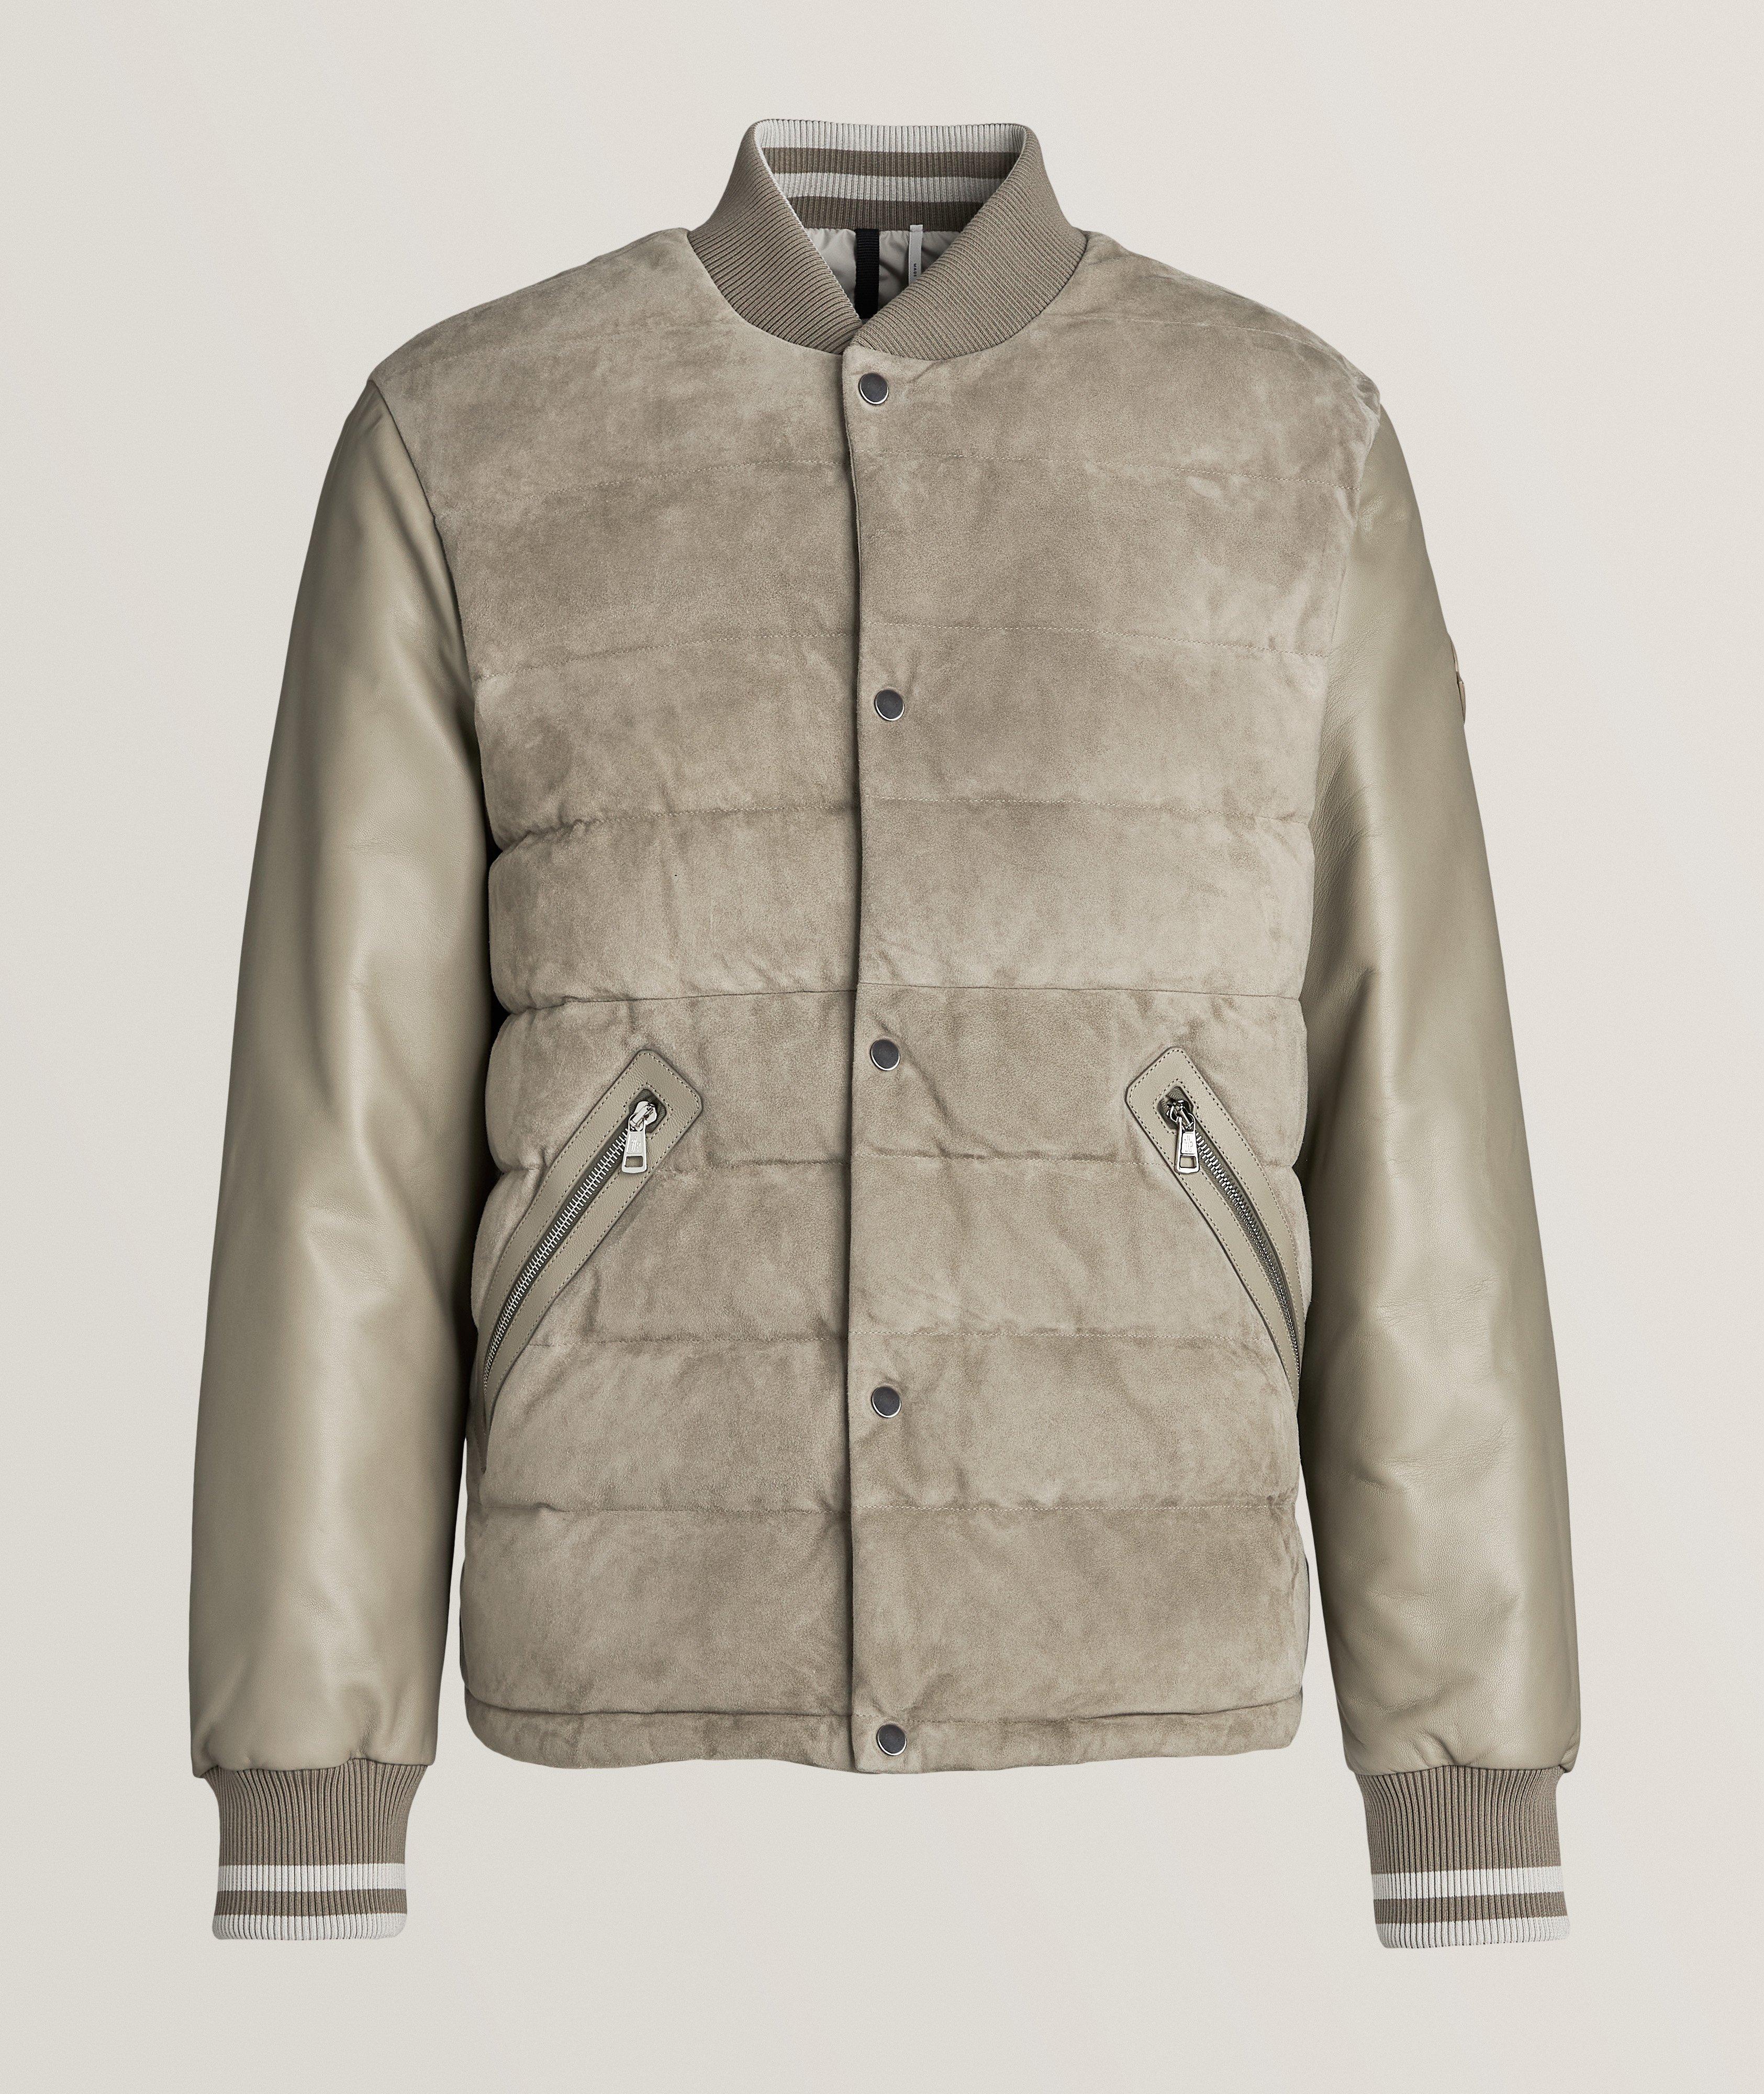 Chalanches Goat Leather Bomber image 0